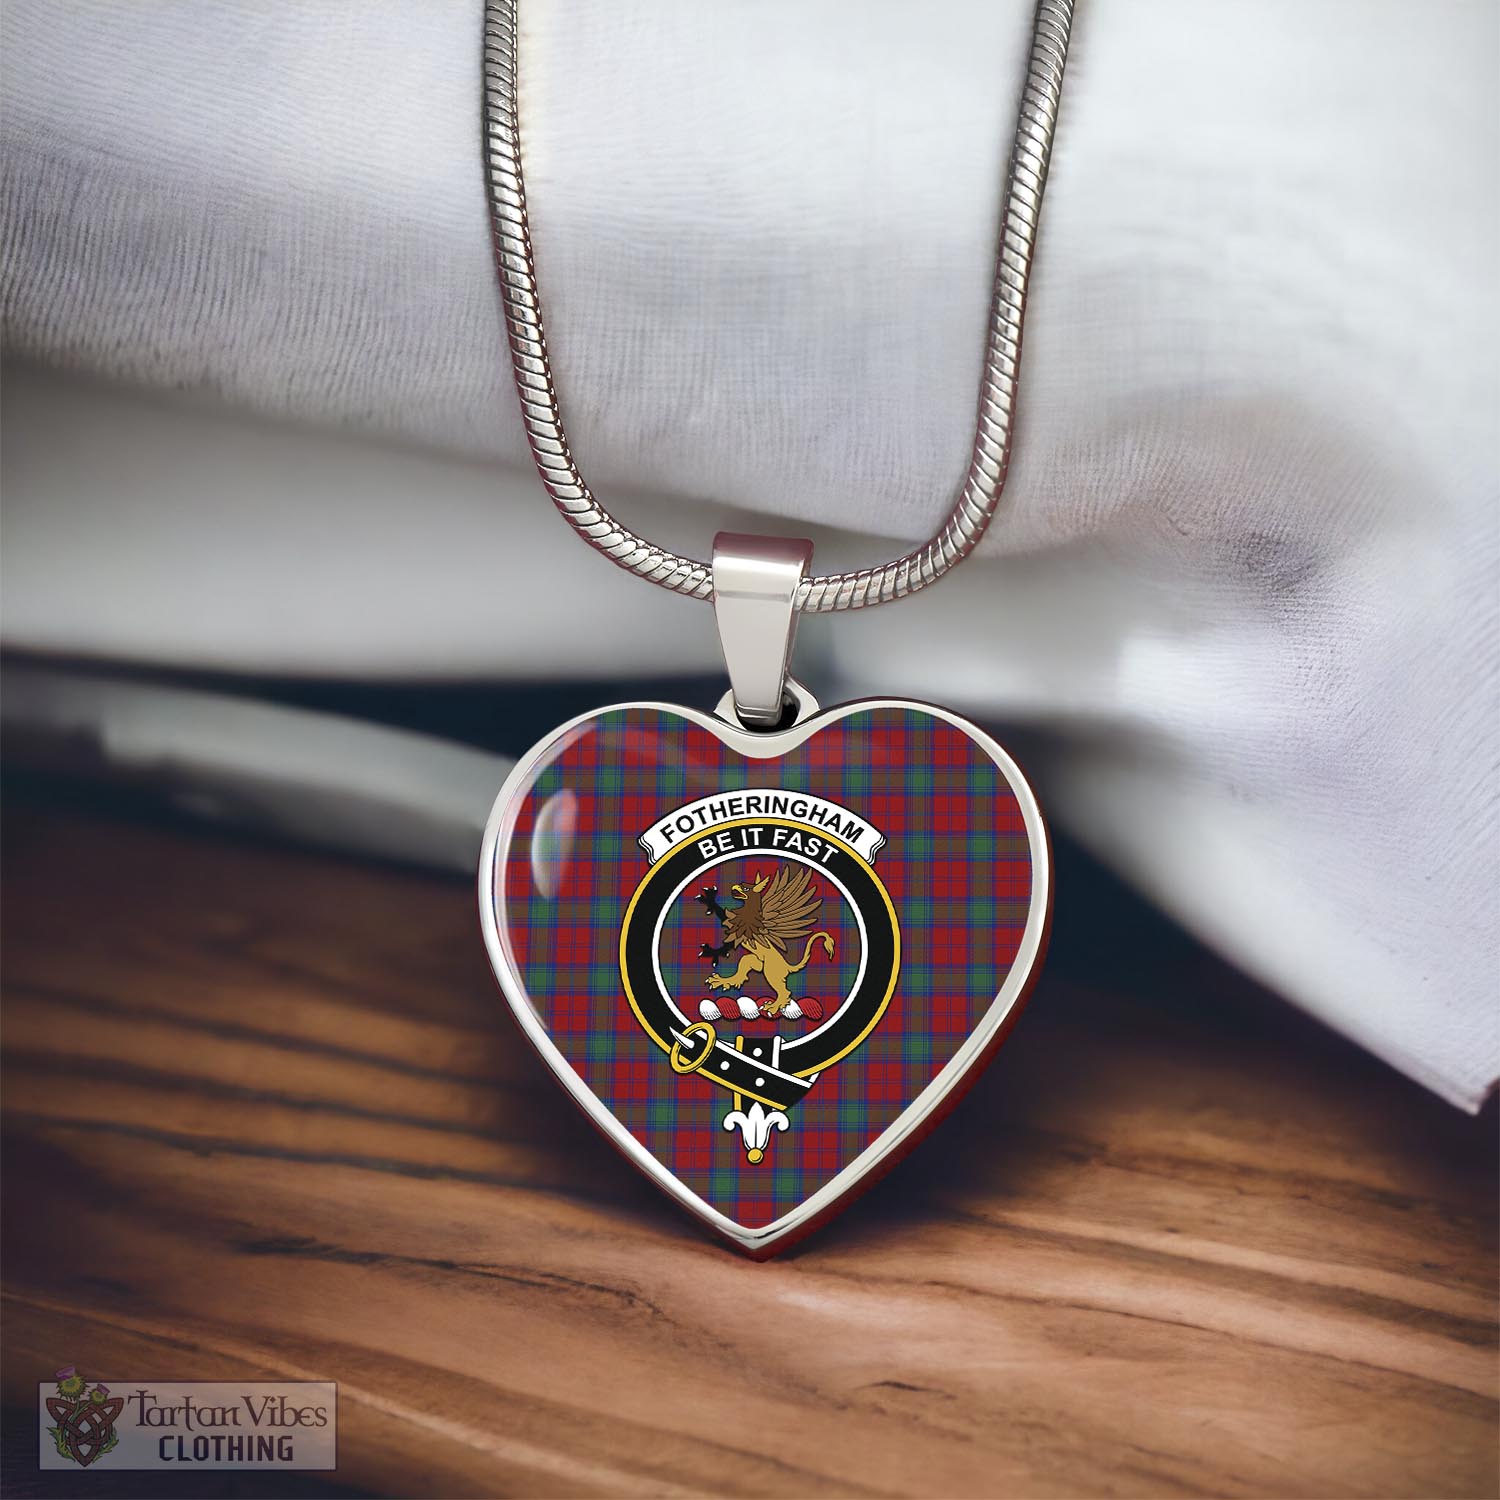 Tartan Vibes Clothing Fotheringham Modern Tartan Heart Necklace with Family Crest